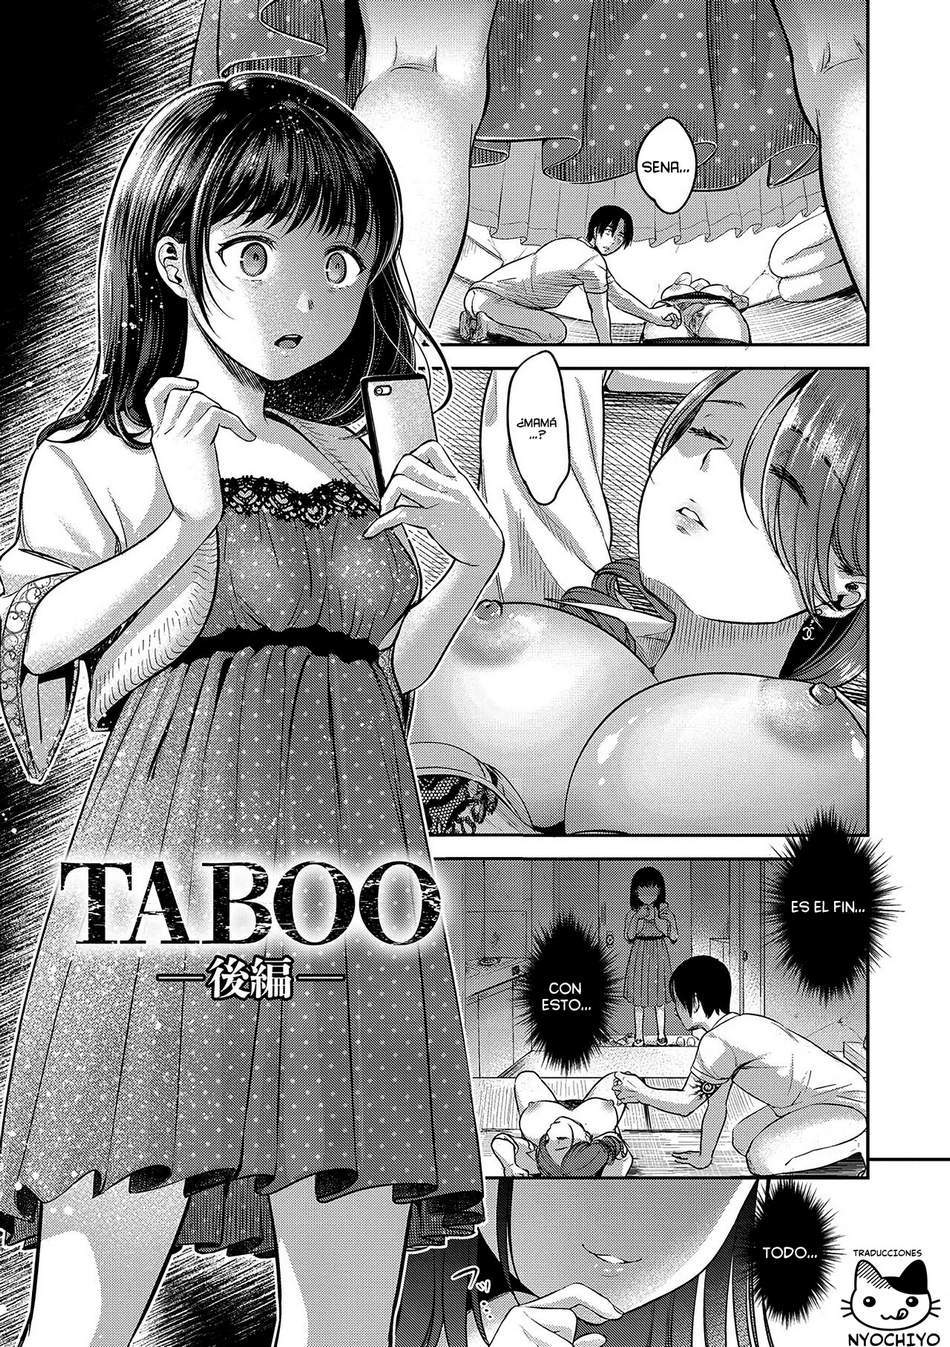 TABOO #3 - Page #1